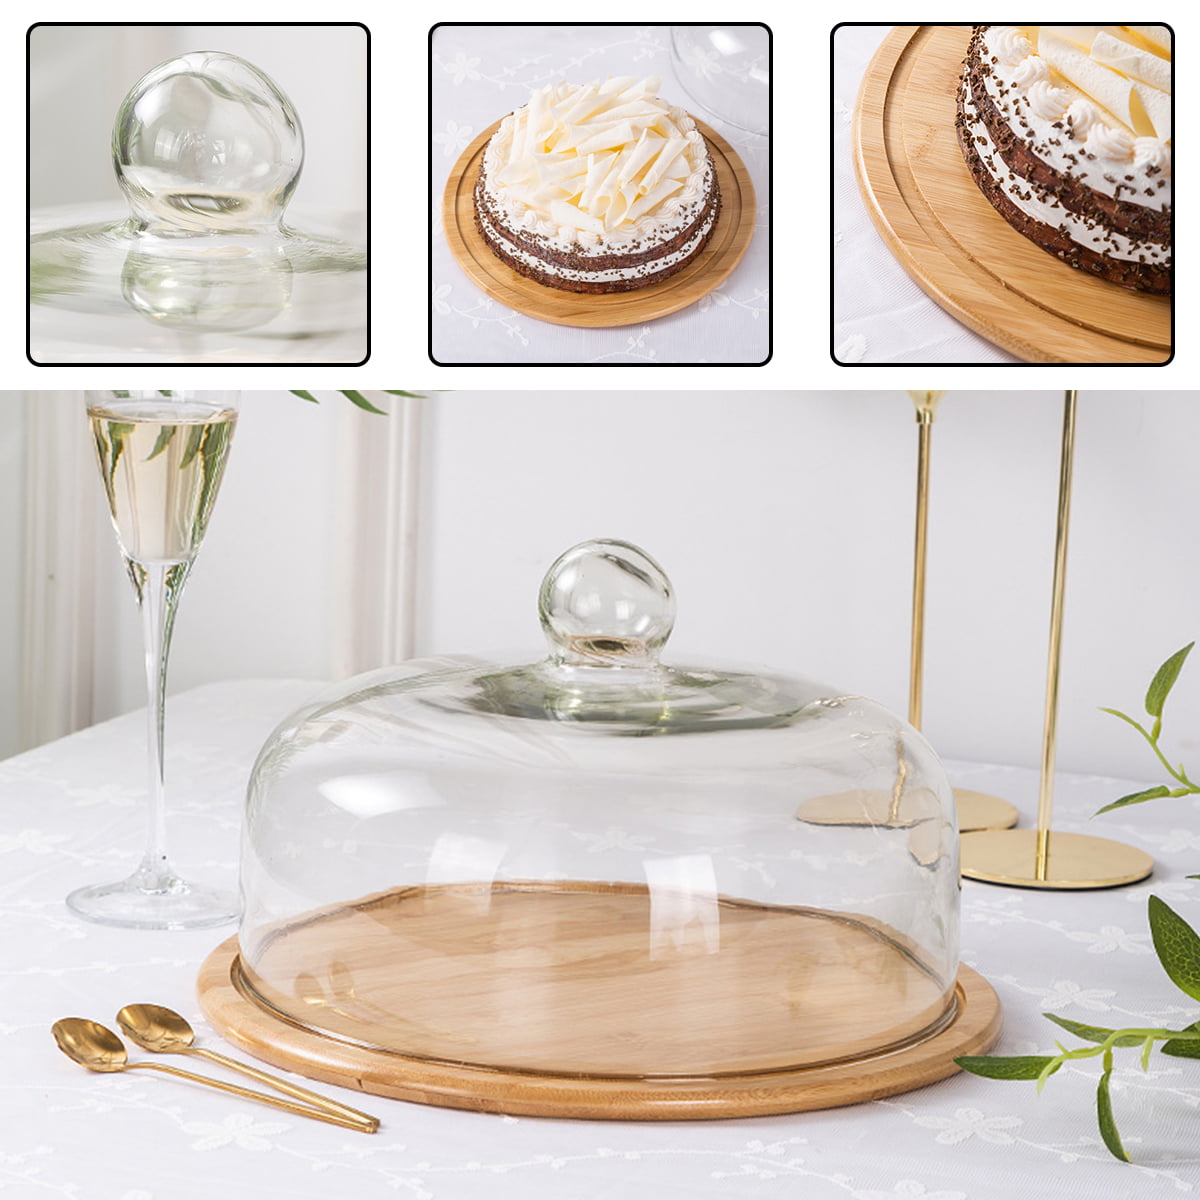 Clear Acrylic Cupcake Cake Stand Dessert Display Holder Plate w/ Dome Lid Cover